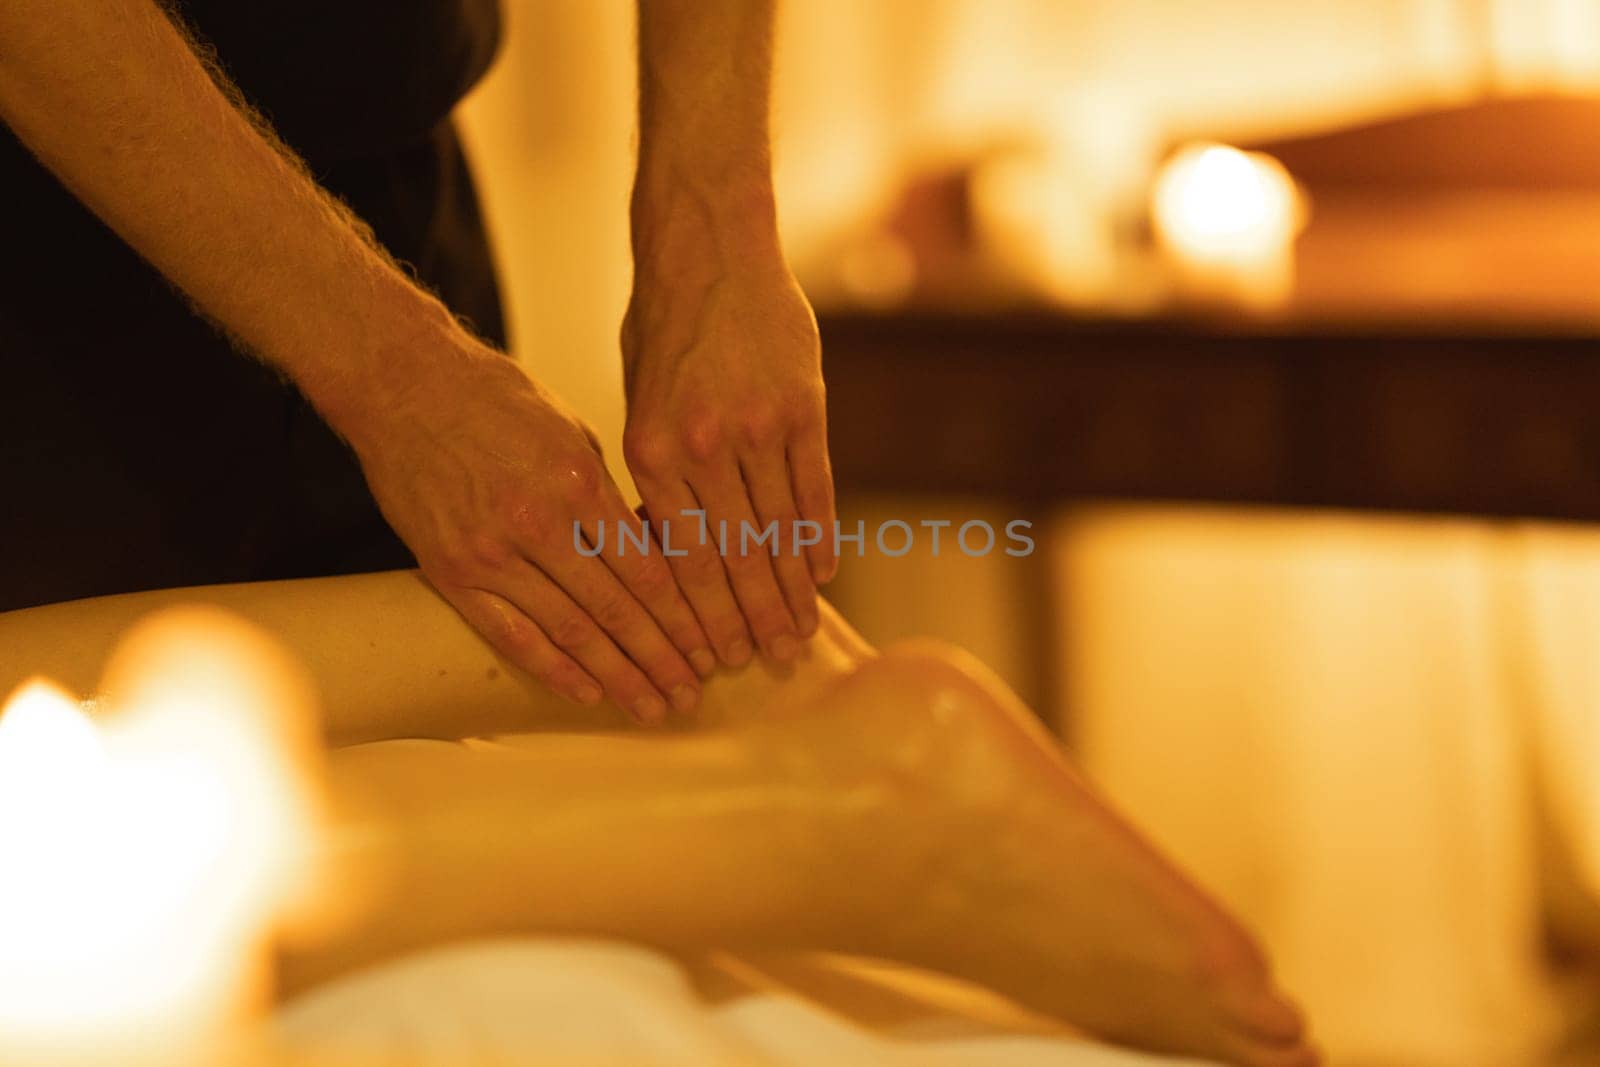 Massage in spa salon - a therapist massaging the foot of a woman client by Studia72